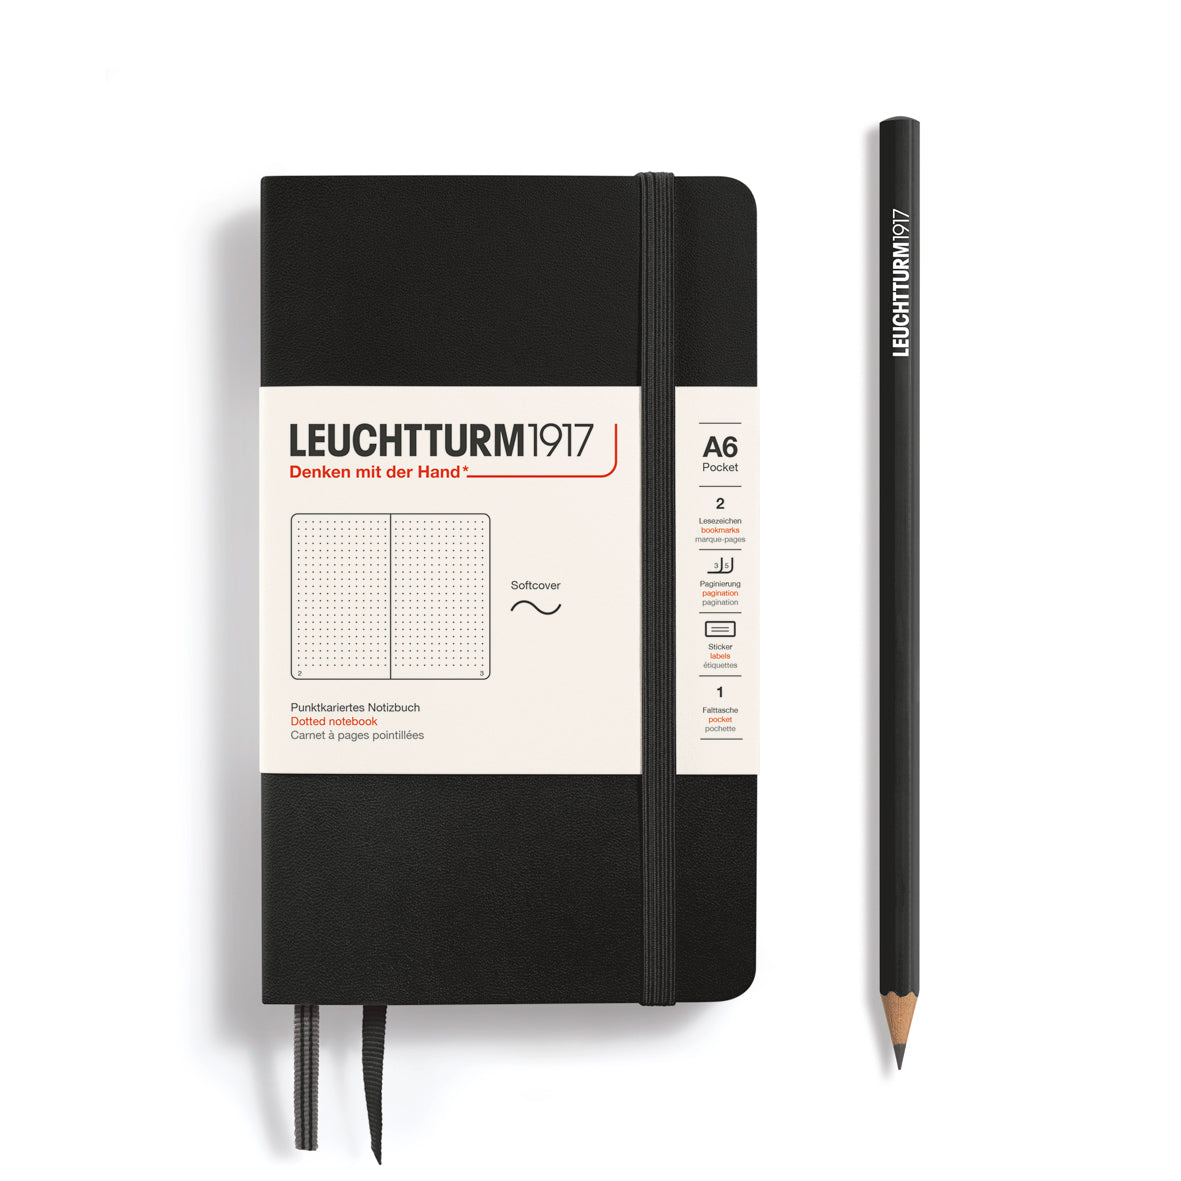 LEUCHTTURM1917 Notebook A6 Pocket Softcover in black and dotted inside at Penny Black